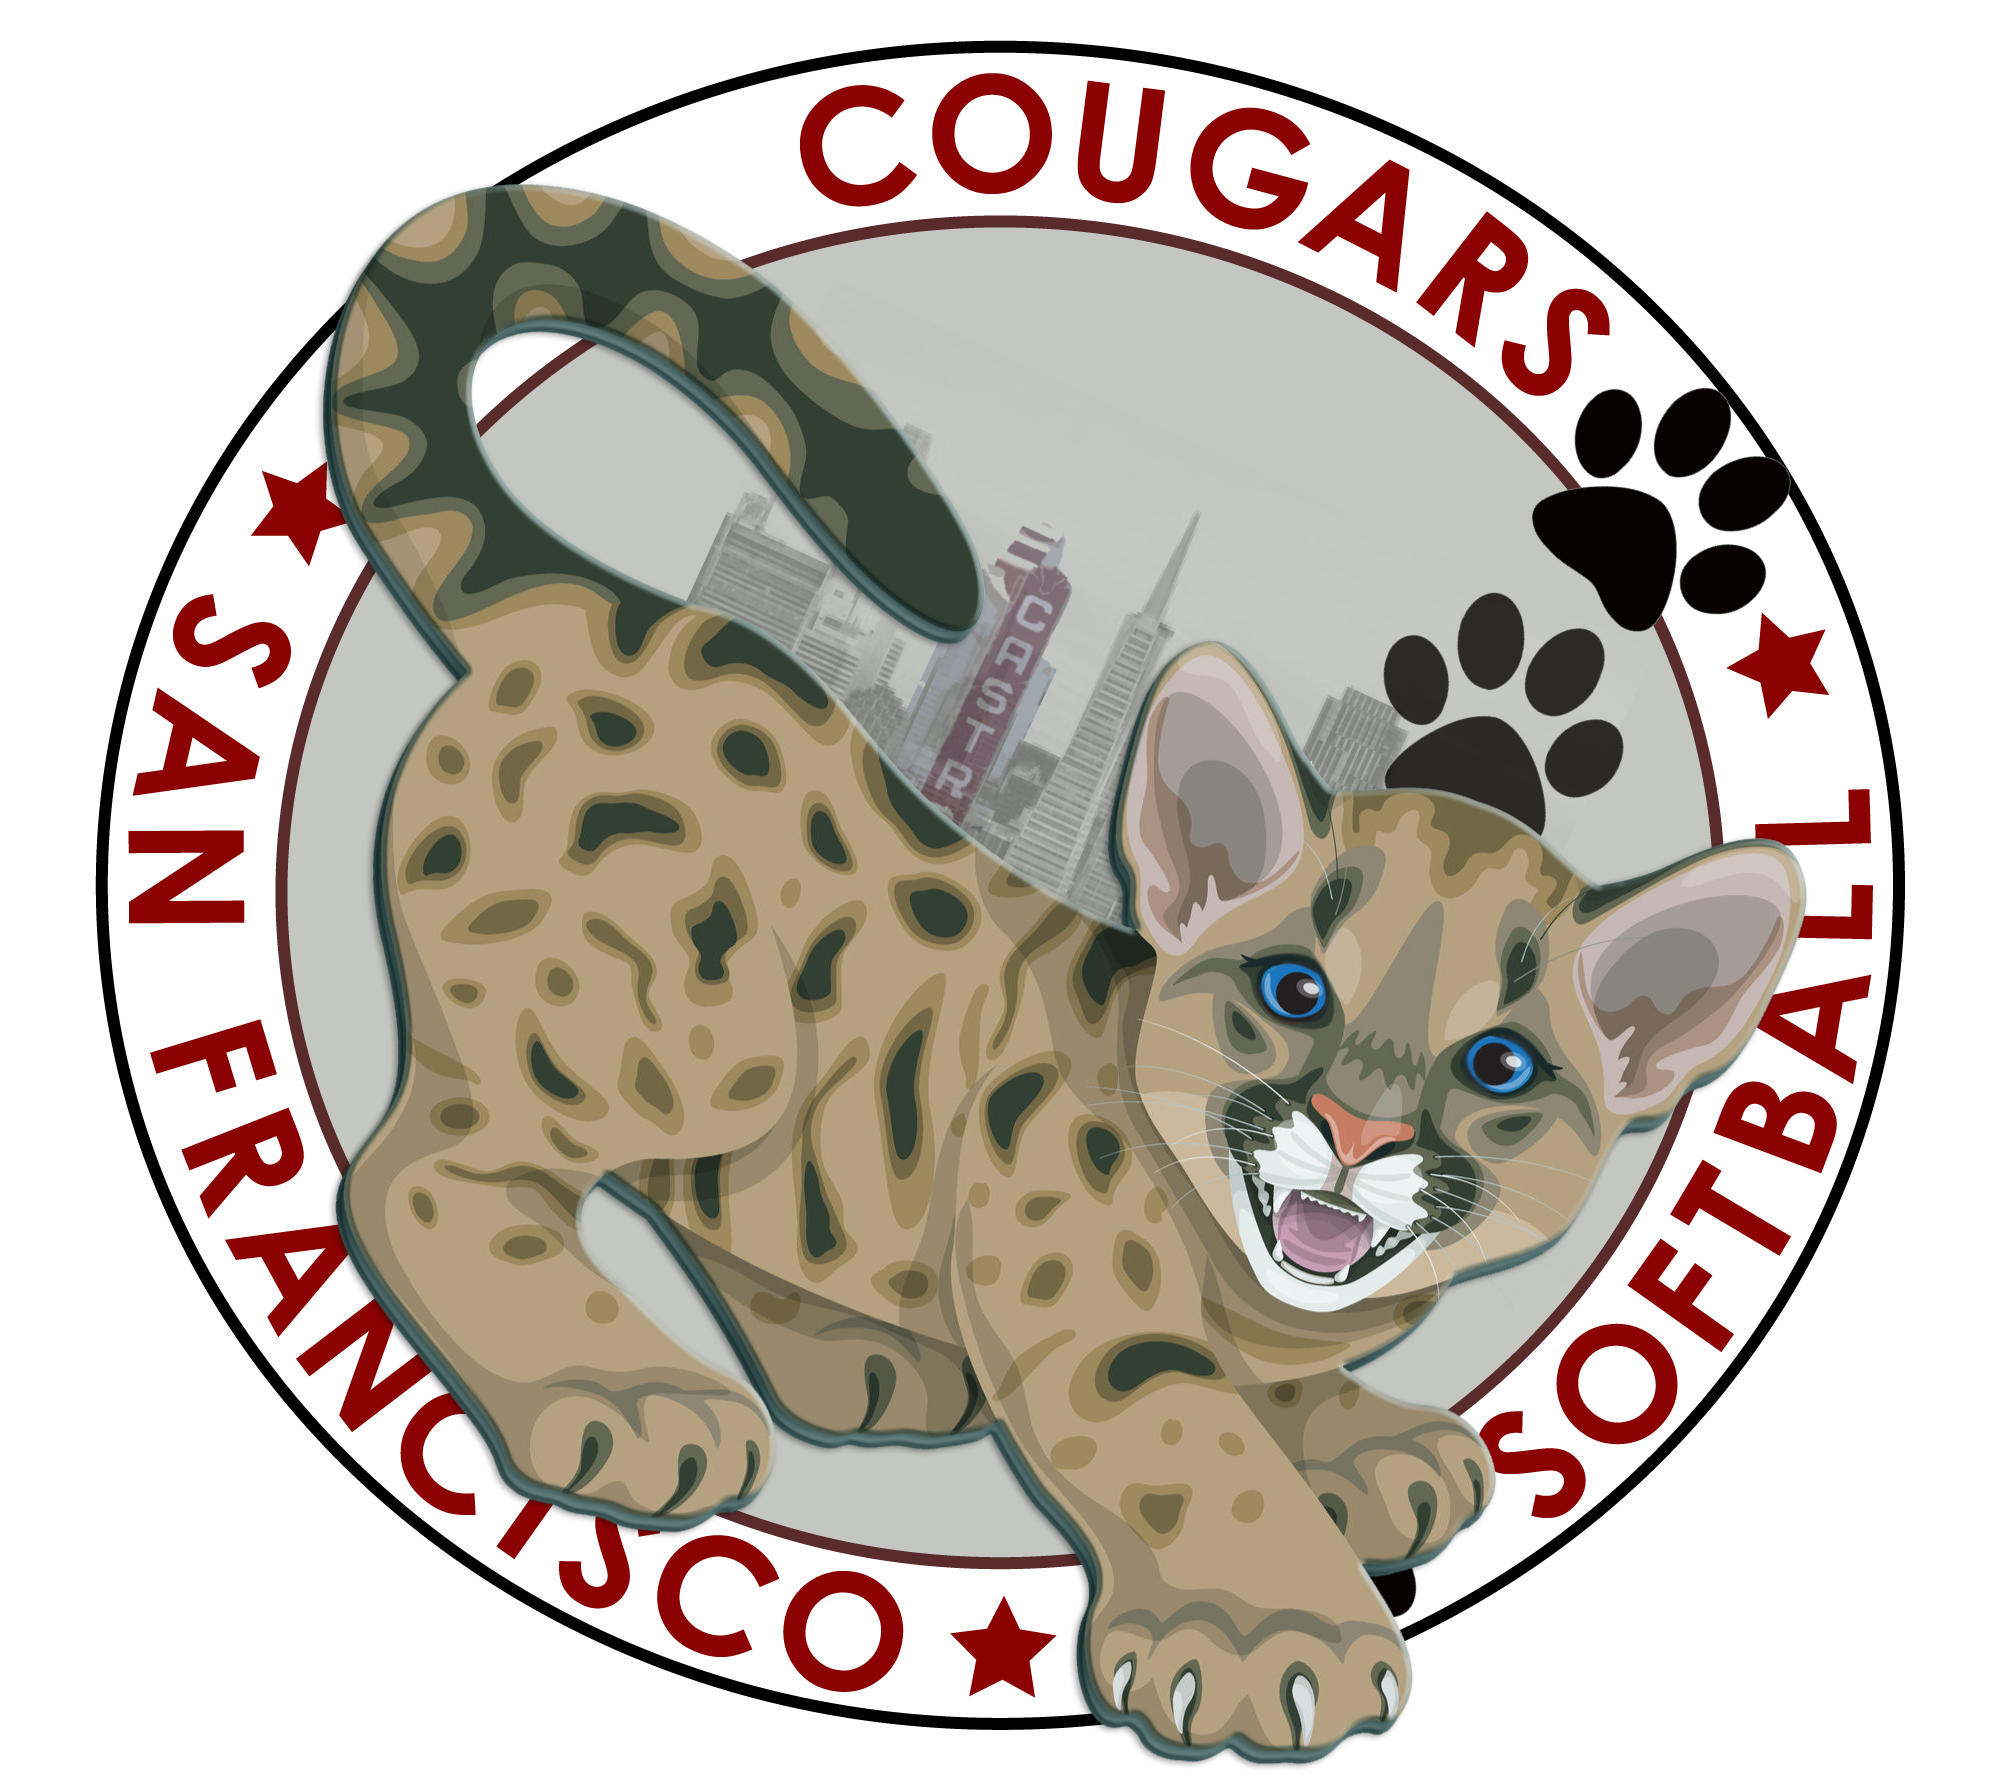 SF Cougars